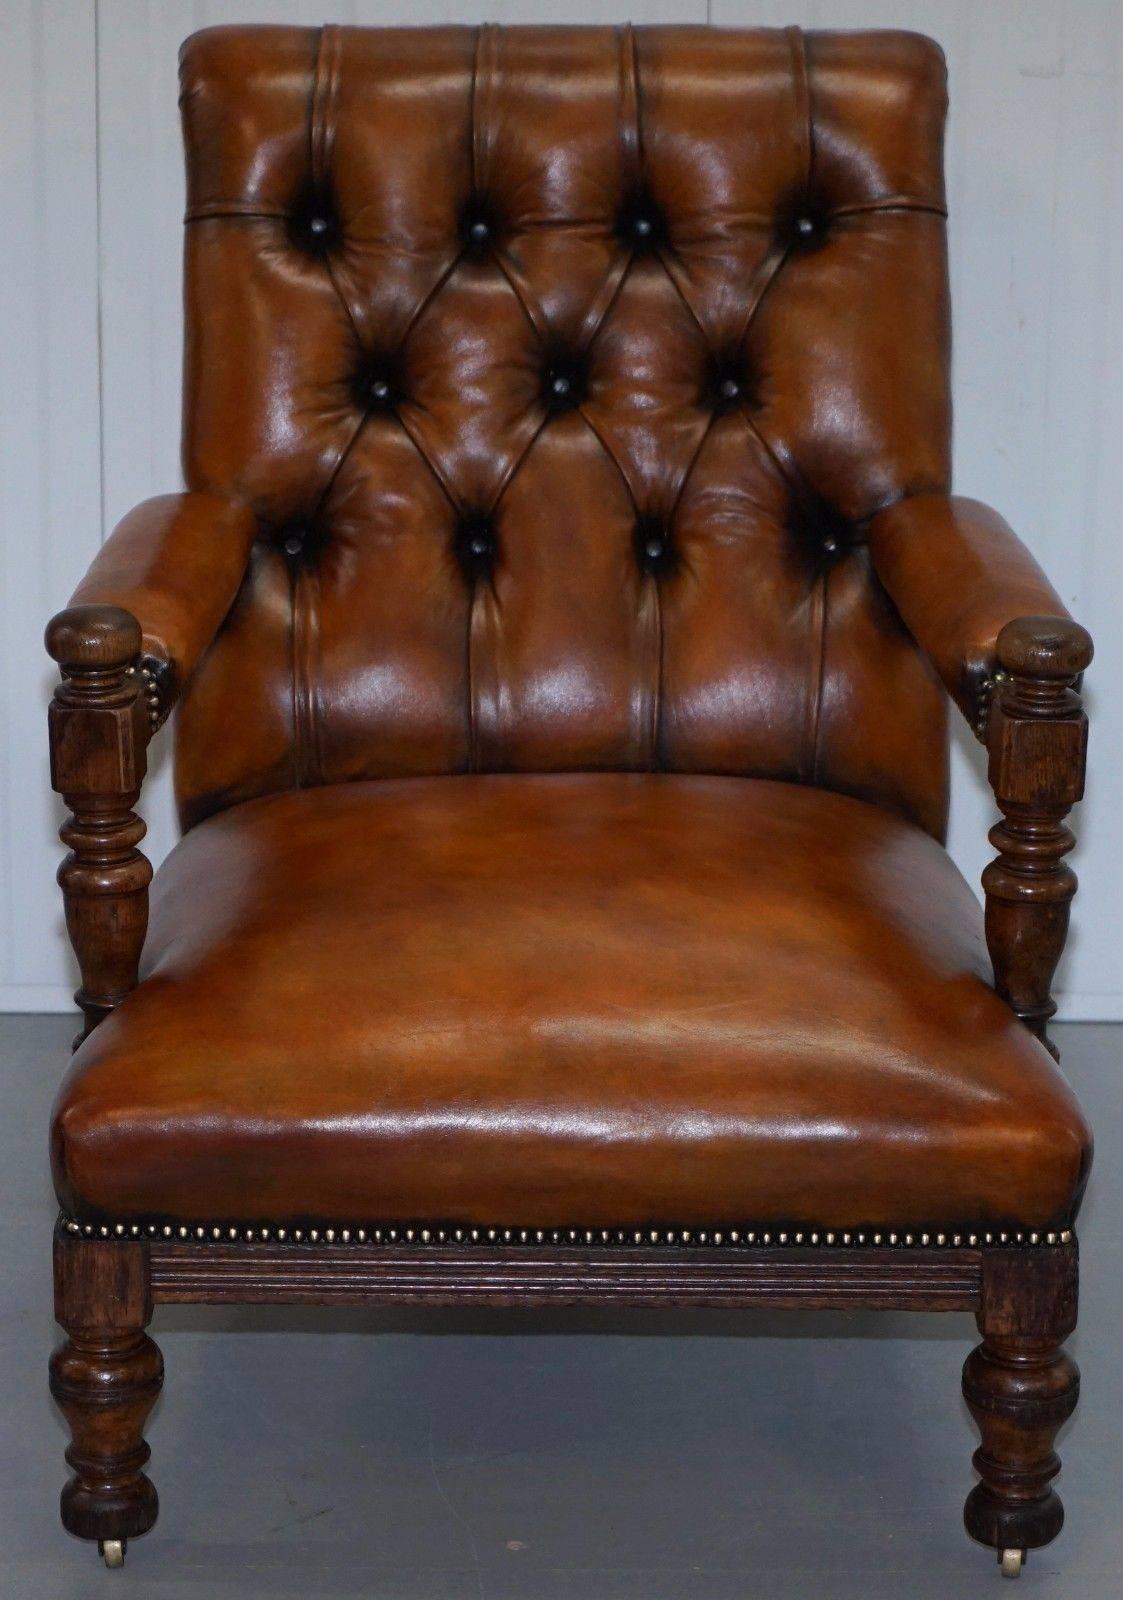 Great Britain (UK) Rare Fully Stamped Original Gillows of Lancaster Fully Restored Library Armchair